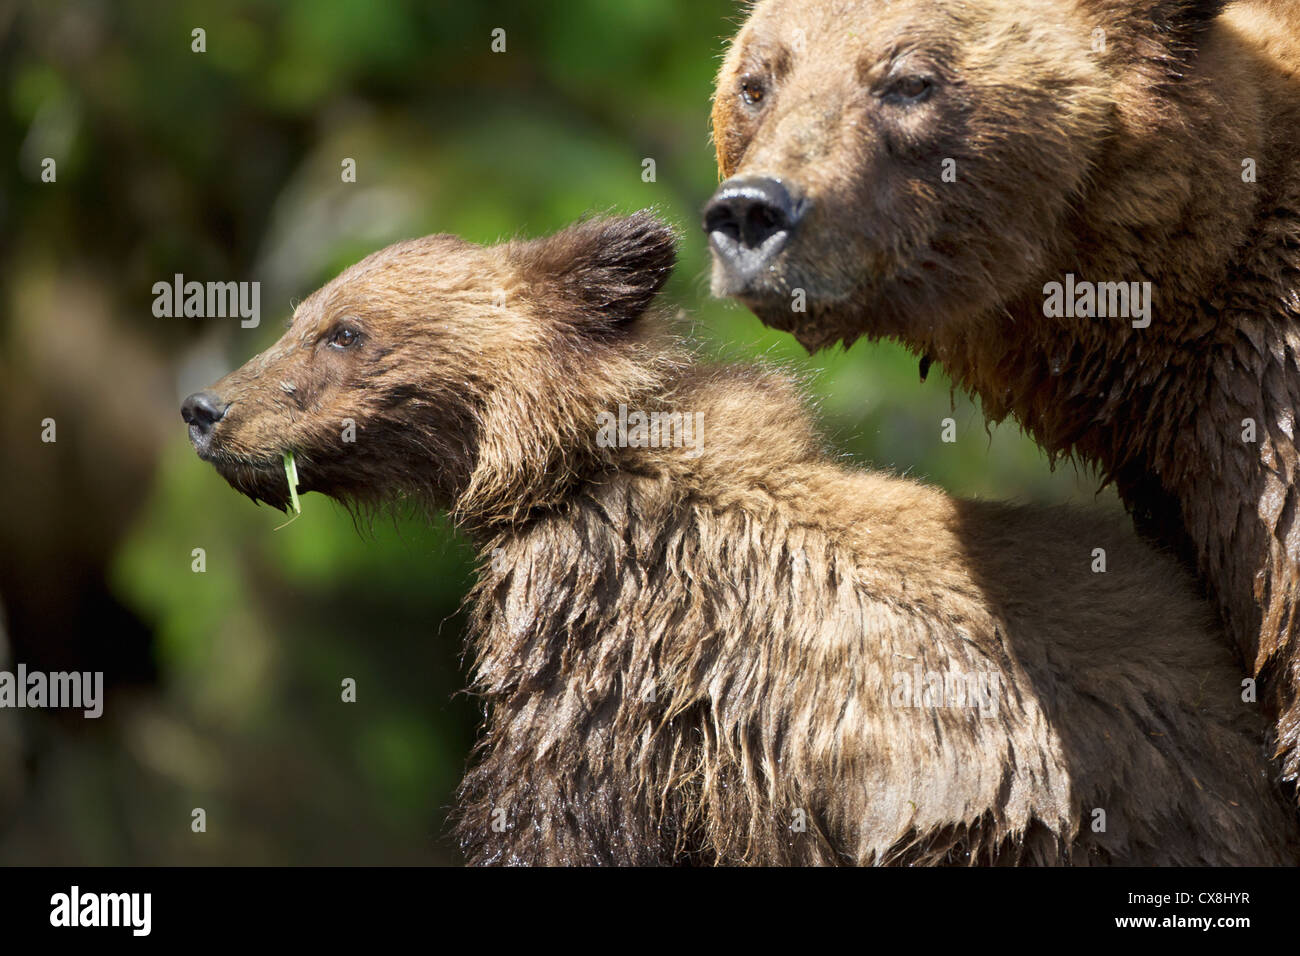 Grizzly bear cub and sow at the khutzeymateen grizzly bear sanctuary near prince rupert;British columbia canada Stock Photo